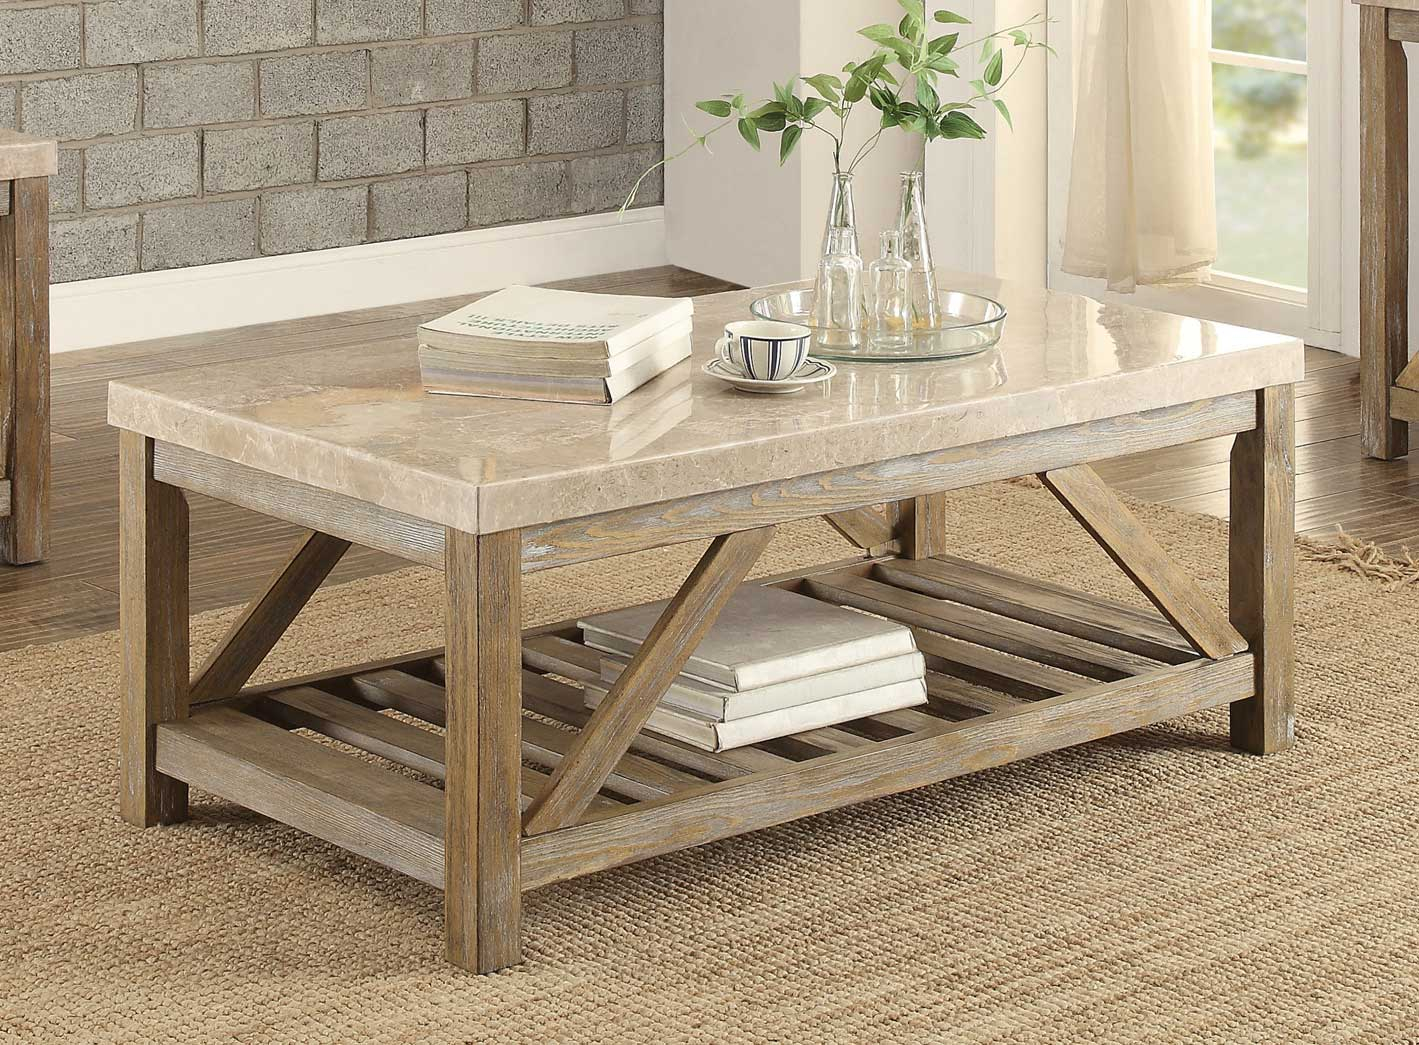 Homelegance Ridley Cocktailcoffee Table Set Weathered Wood Finish pertaining to measurements 1419 X 1045